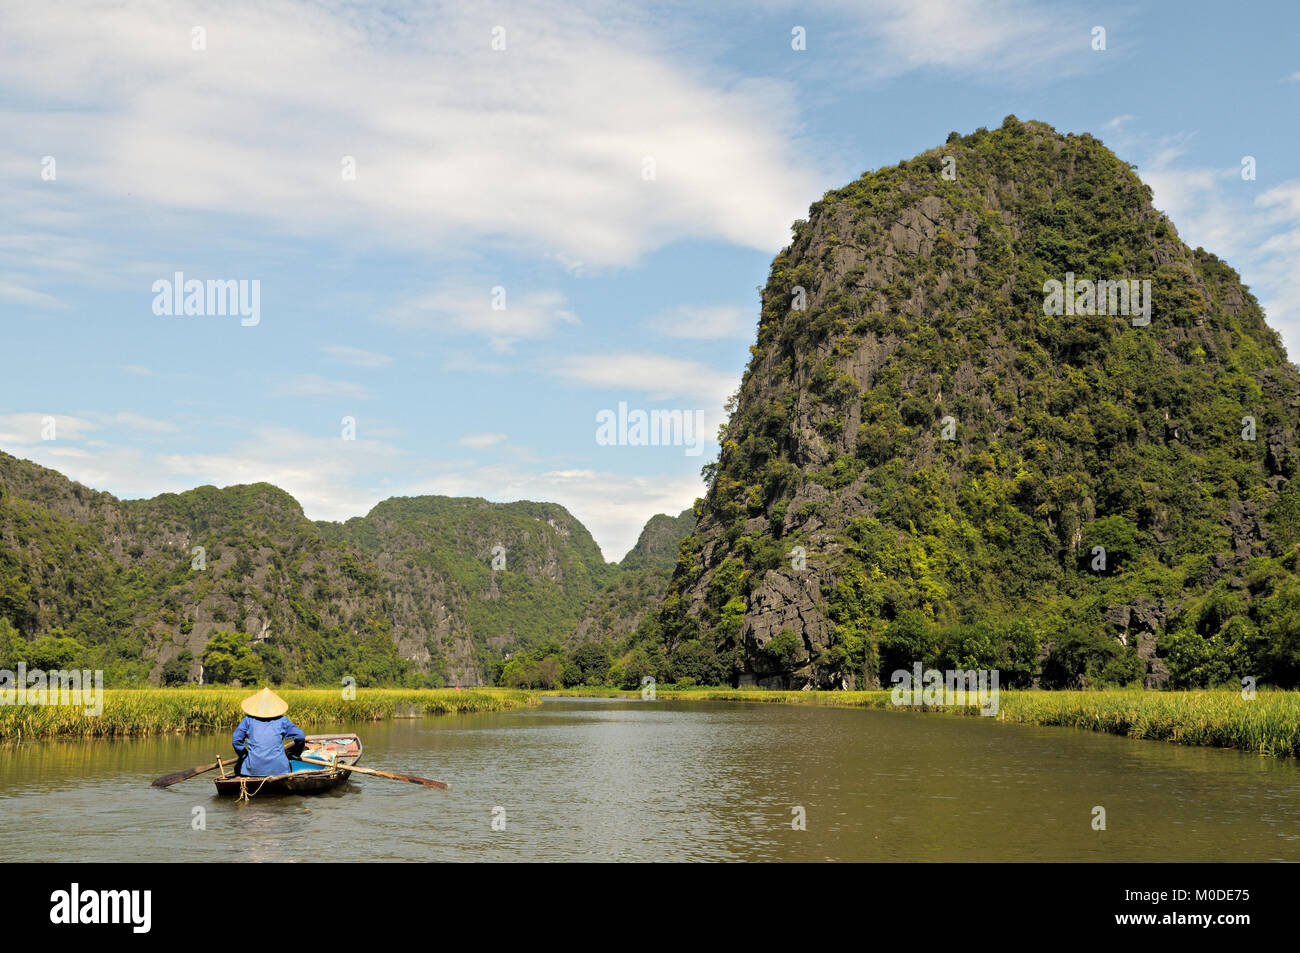 Local boat on the Ngo Dong River in Tam Coc, Ninh Binh Province, north Vietnam Stock Photo